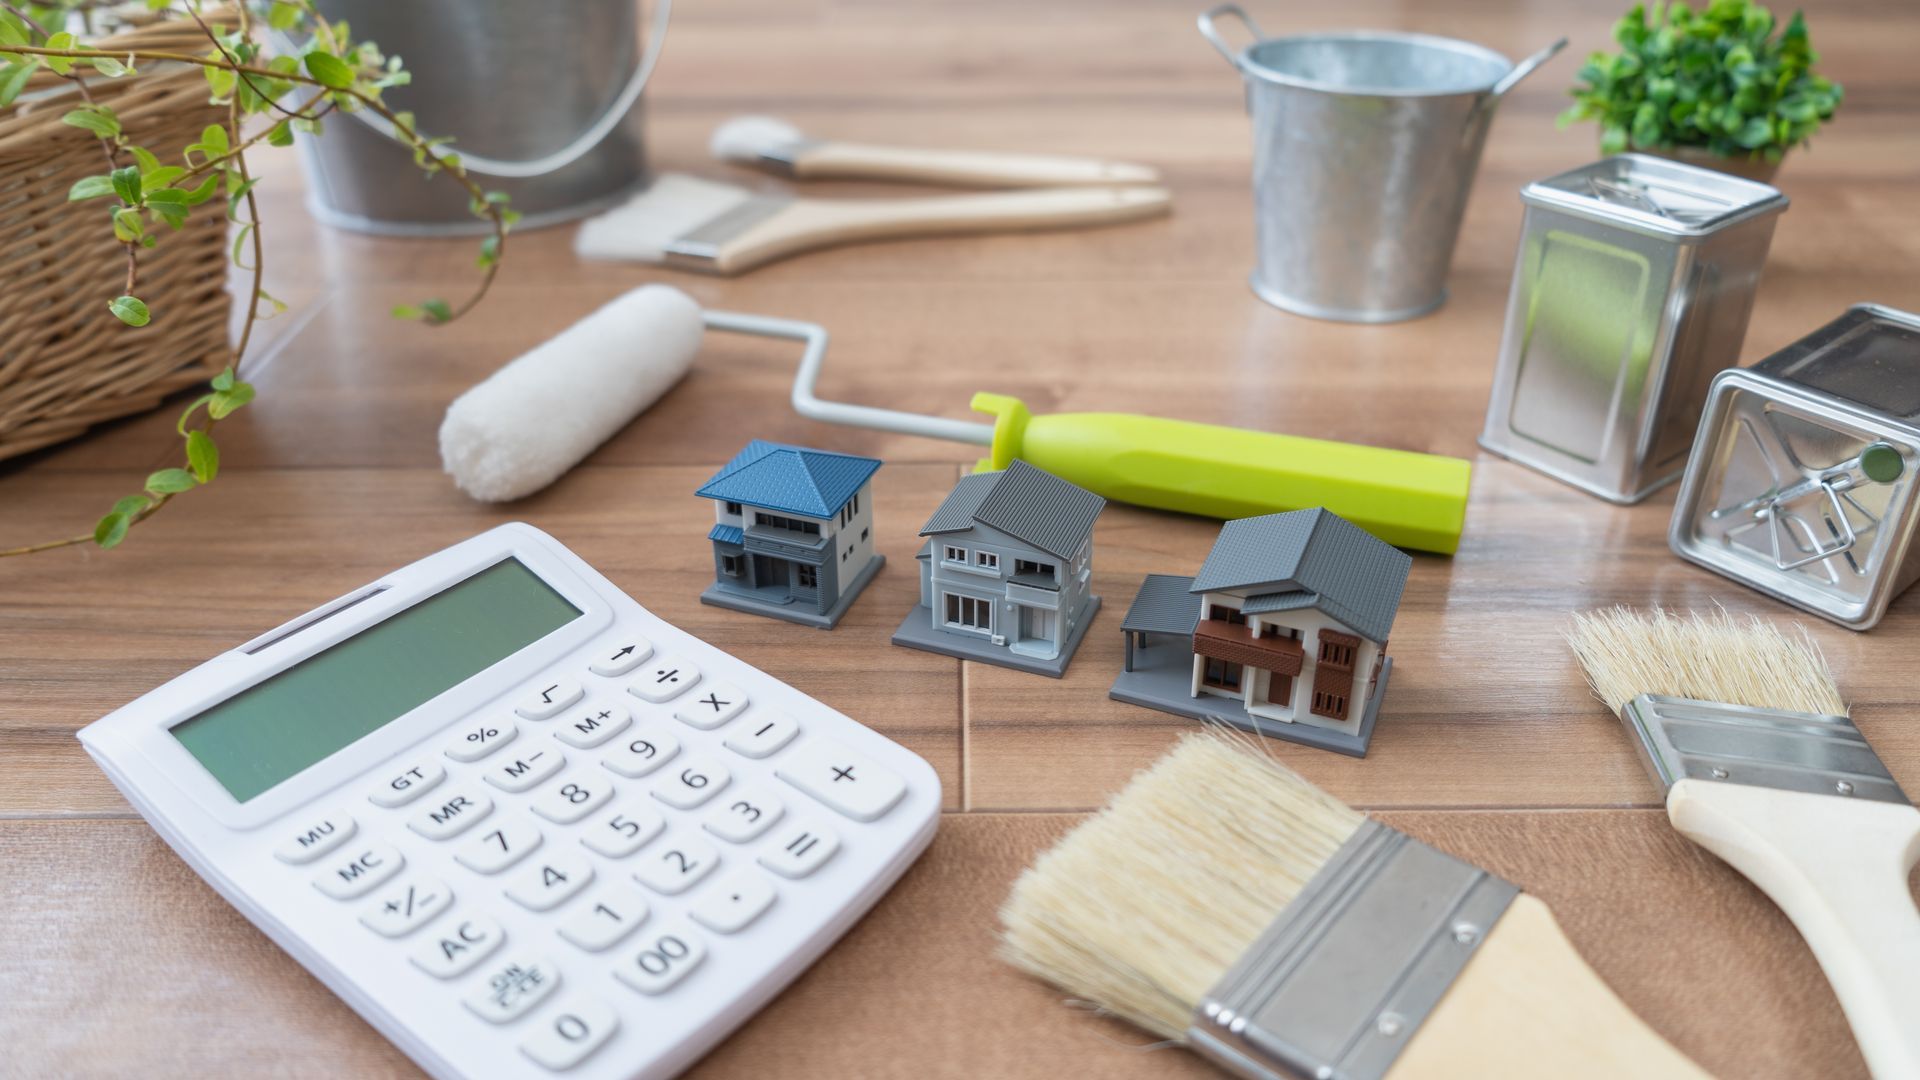 a calculator, brushes, paint rollers, and miniature houses are on a wooden table